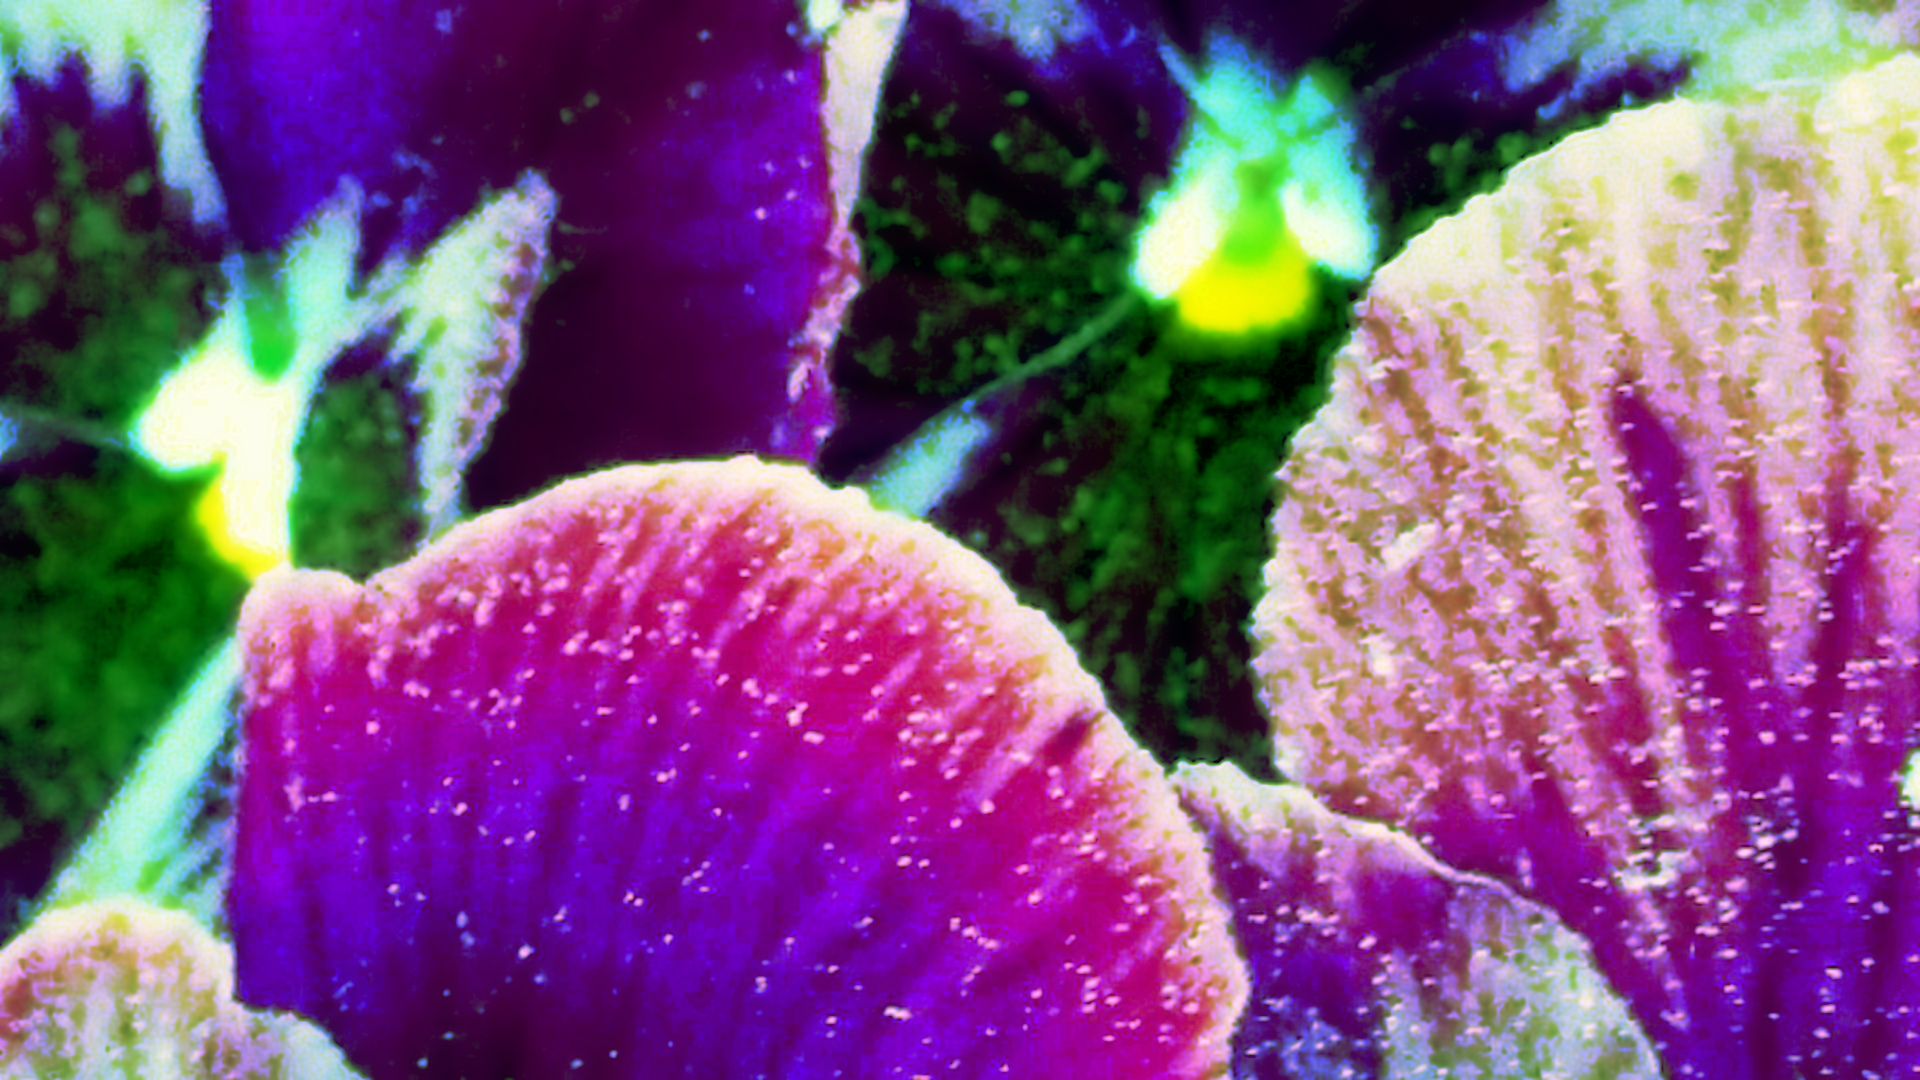 Macro of purple pansies in soft focus, manipulated to make the purples deeper and accentuate the contrasts. Lighter colored outer parts of petals are in the foreground. In the background are two yellow and white centers, each surrounded by darker colored inner parts of petals. The image has an abstract look. This is the first of two treatments of the original image, and represents intense desire following the initial spark.